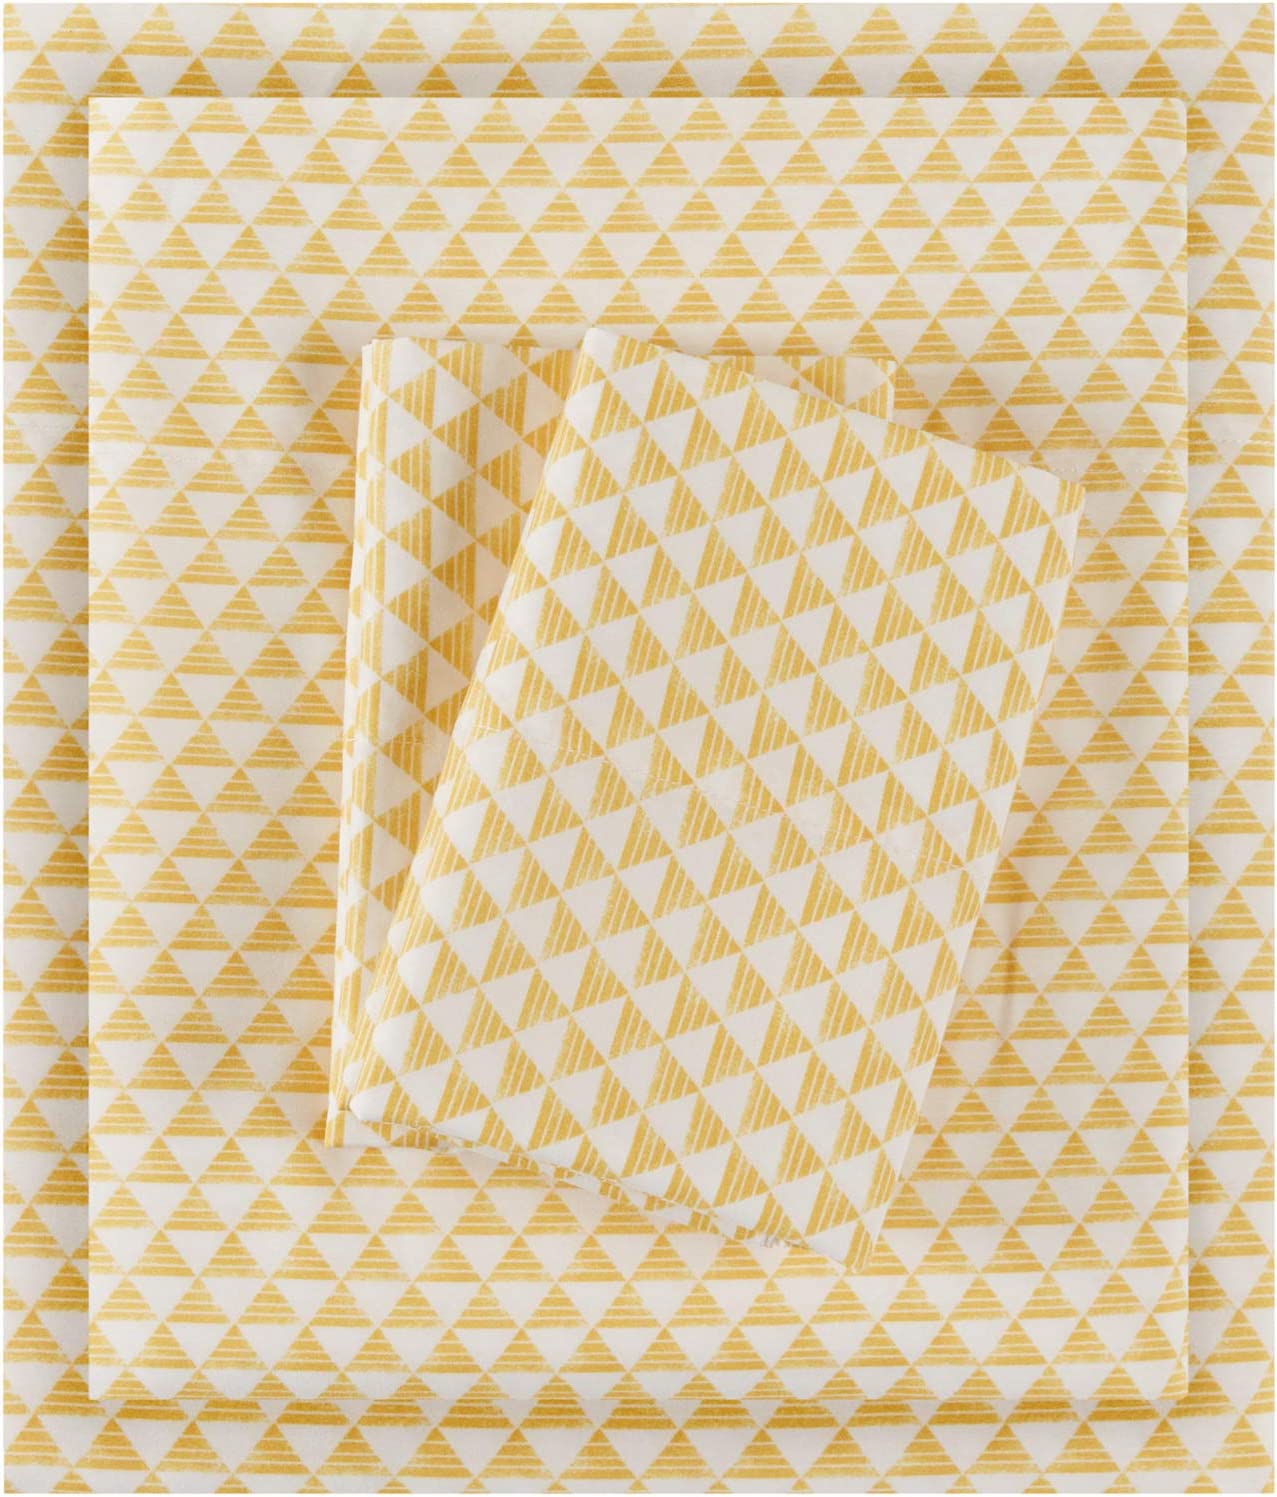 Intelligent Design Ultra Soft Wrinkle Free All Seasons Year Round, Full, Triangle Yellow